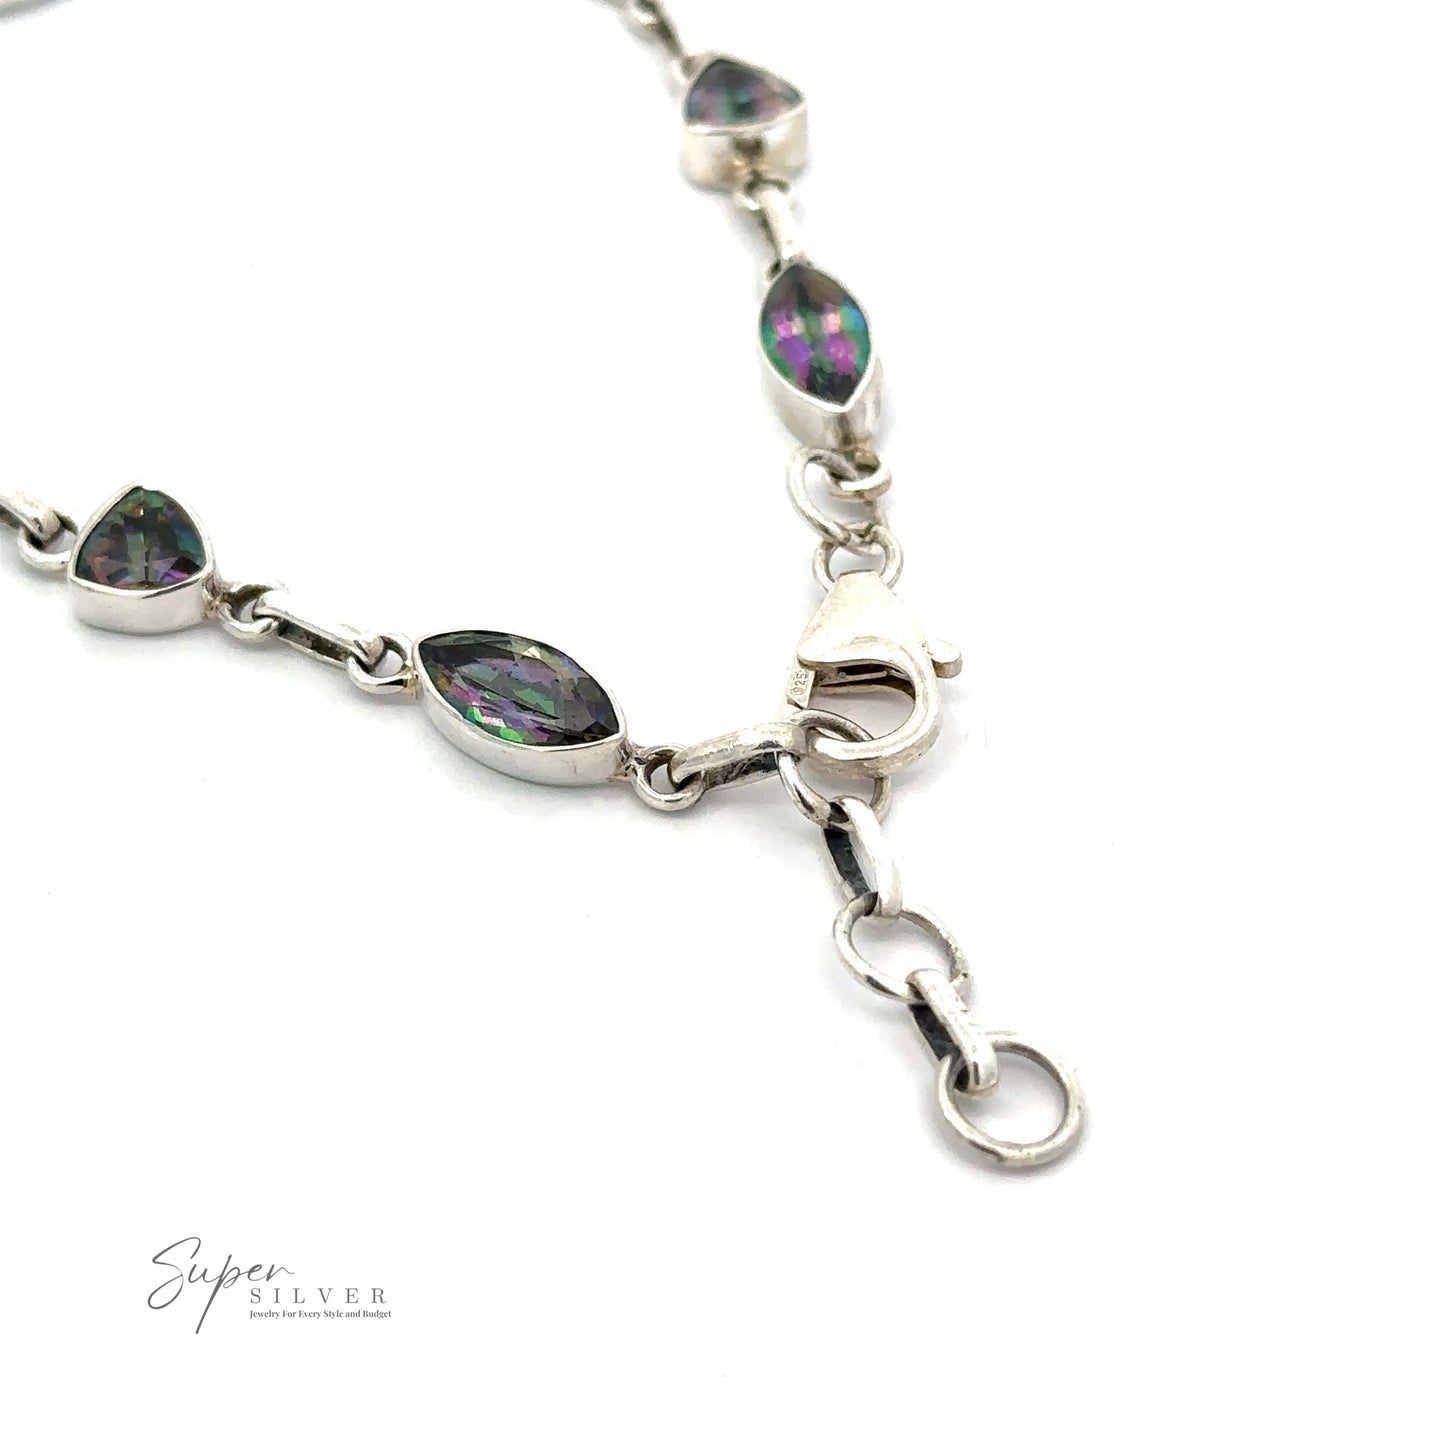 
                  
                    Close-up of a sterling silver bracelet featuring teardrop-shaped gemstones and a clasp. The logo "Super Silver" is visible at the bottom left corner, highlighting this exquisite piece of Rainbow Mystic Topaz Marquise and Triangle Shape Link Bracelet.
                  
                